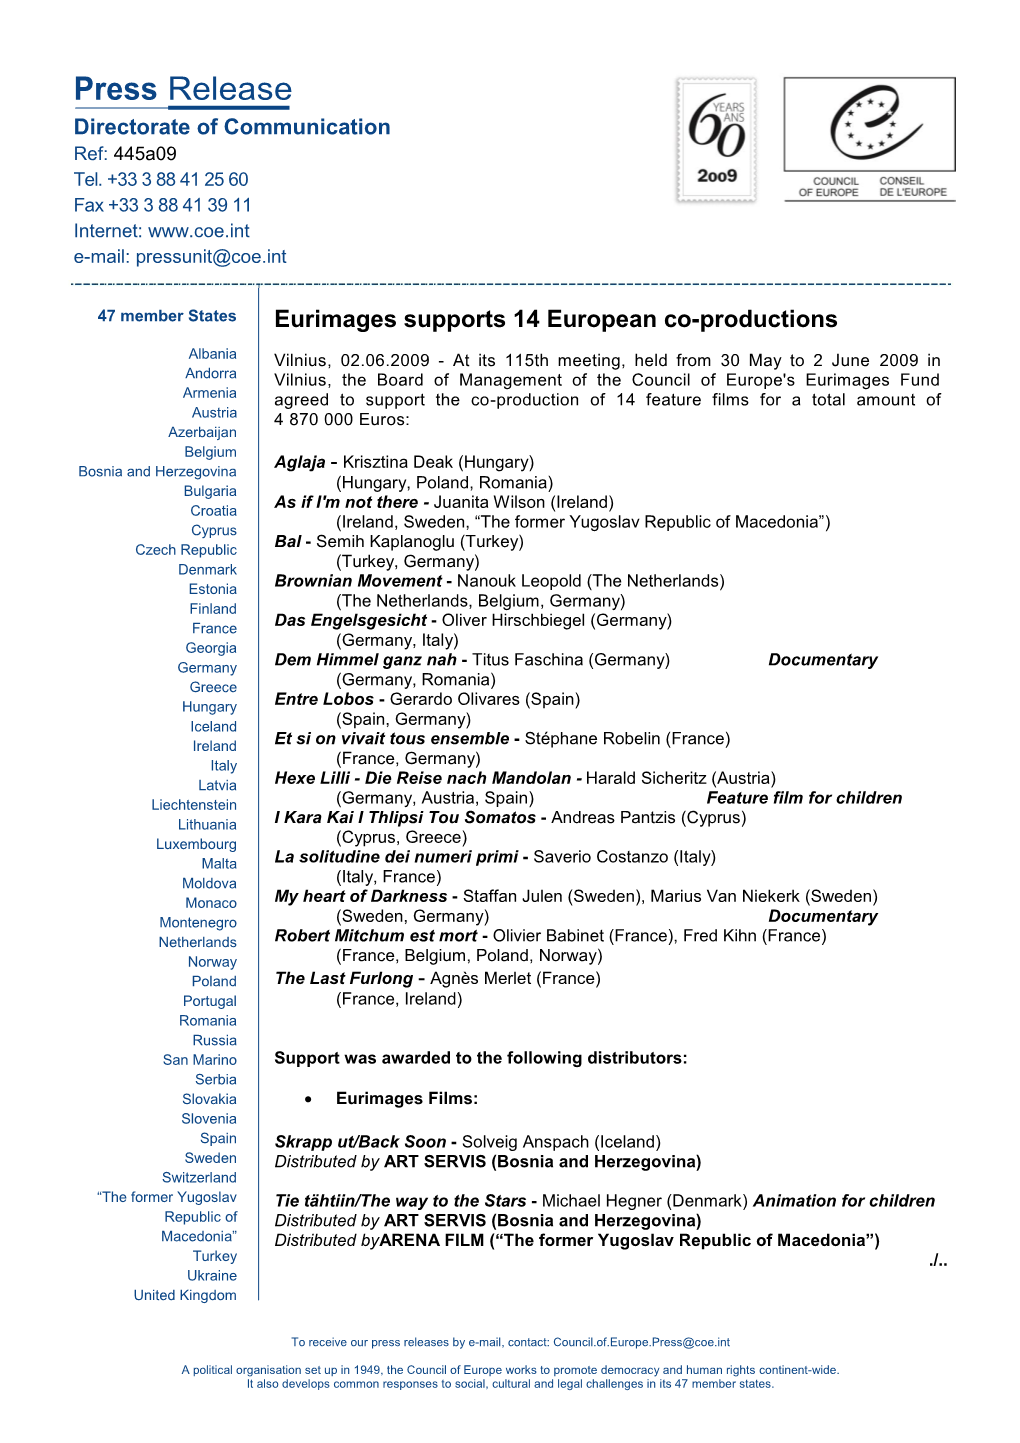 Eurimages Supports 14 European Coproductions